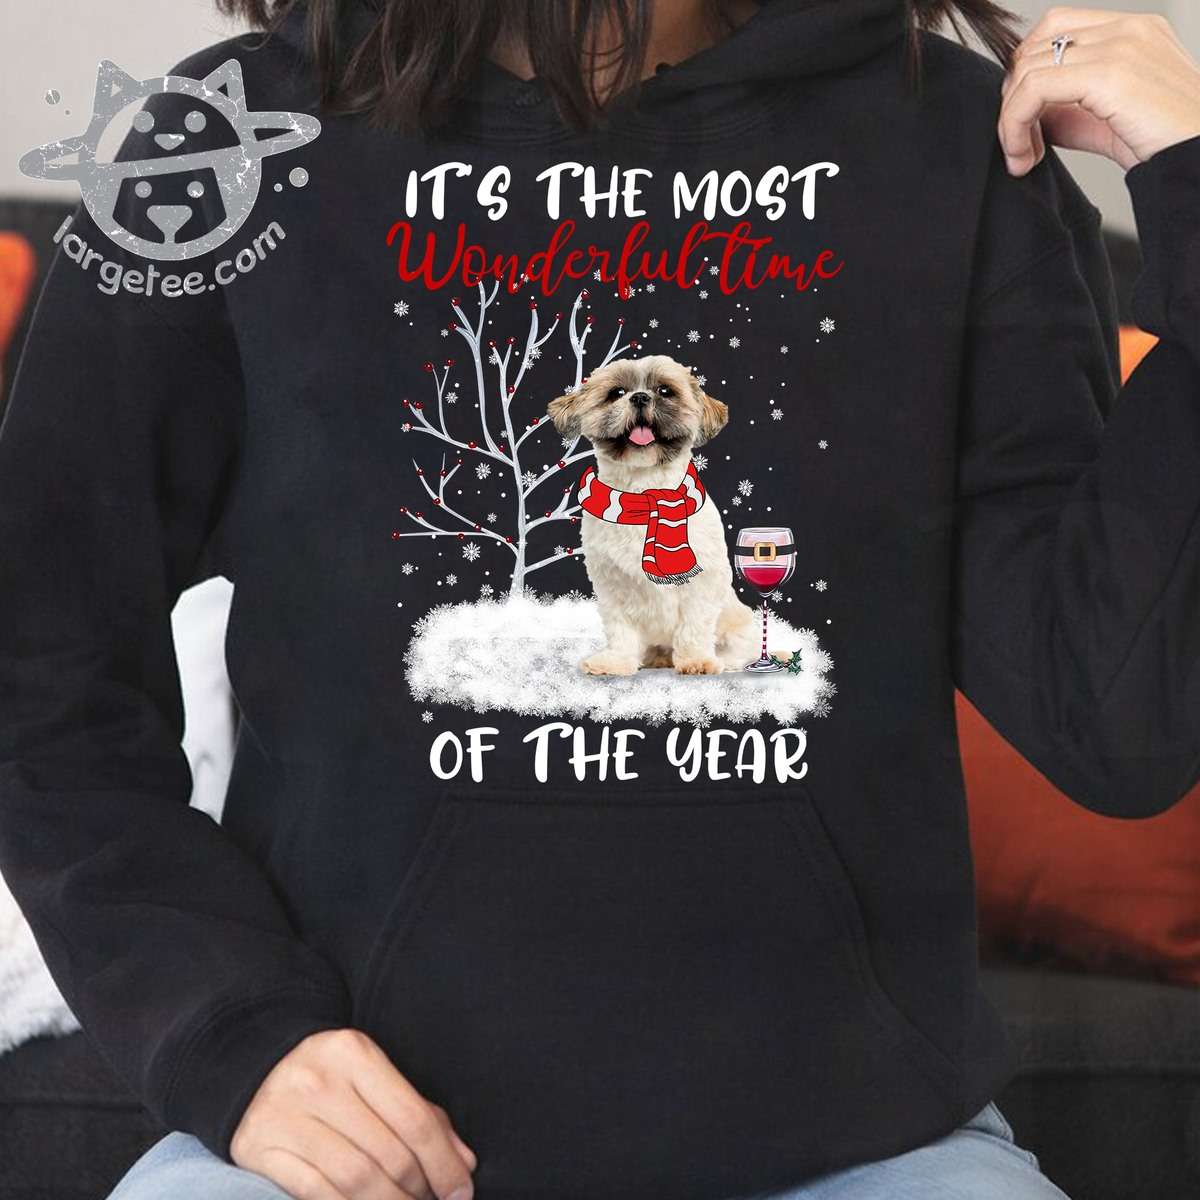 It's the most wonderful time of the year - Shih Tzu dog, Merry Christmas gift, Christmas ugly sweater